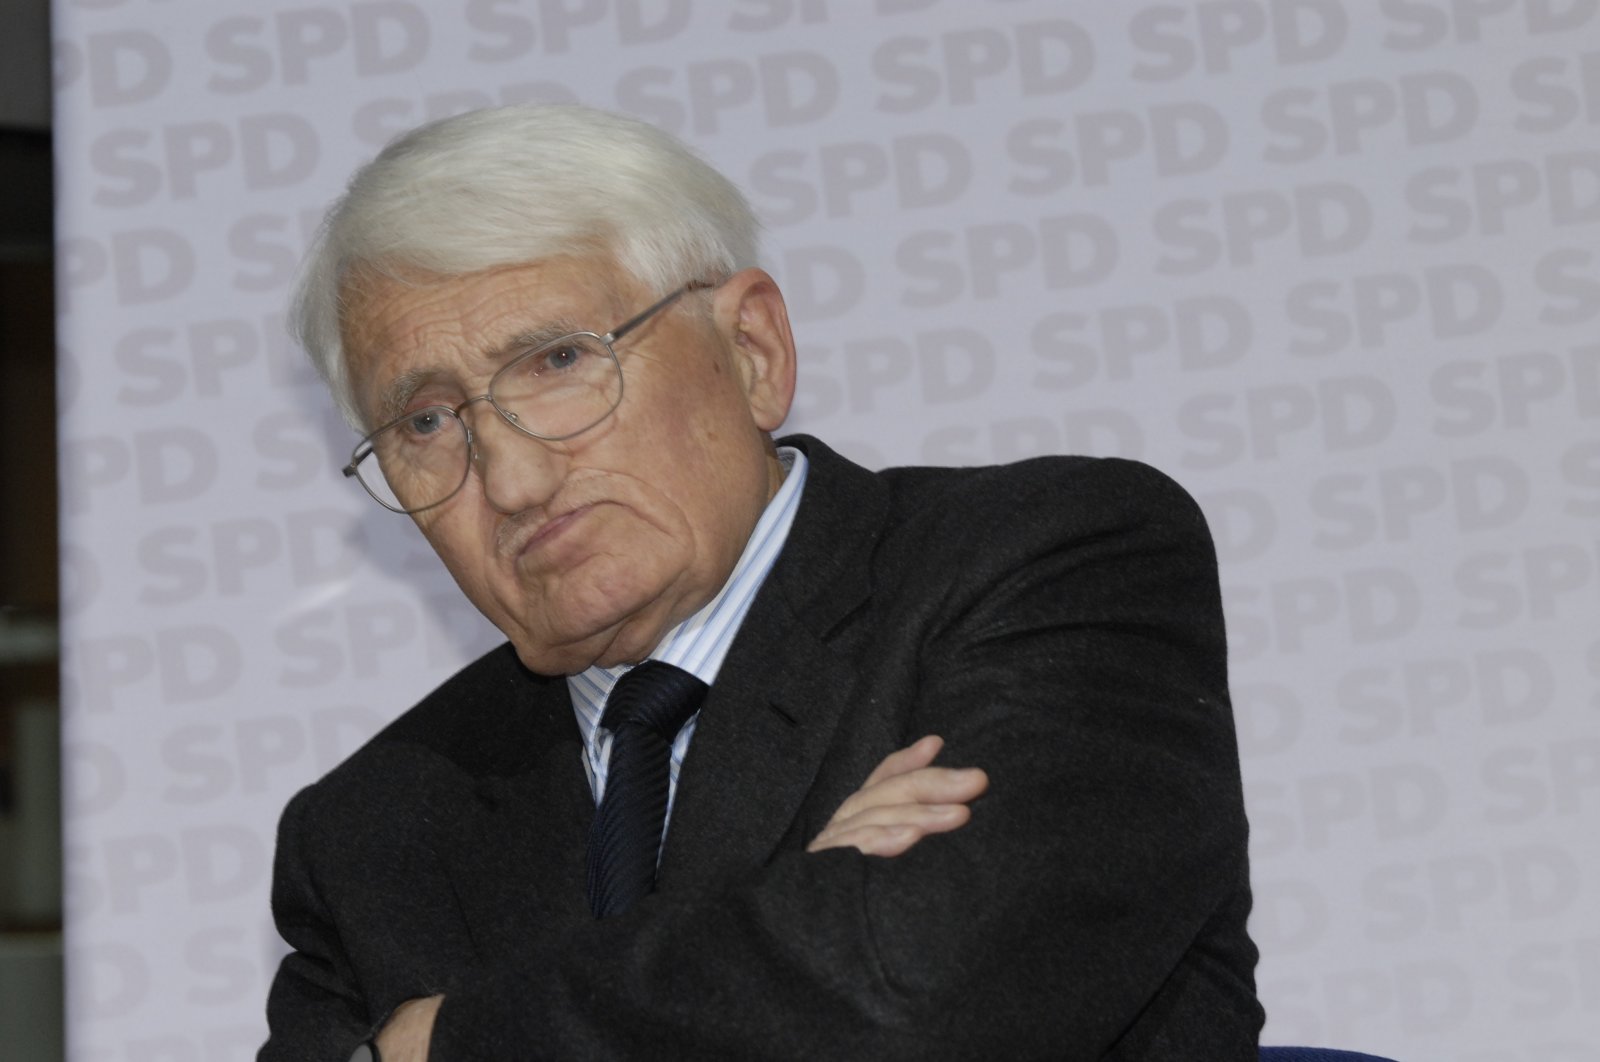 "Jürgen Habermas, a German philosopher by training, like his colleagues Nicole Deitelhoff, Rainer Forst and Klaus Günther, published an open letter titled “A Statement on the Principles of Solidarity” in which they argued that Hamas’s attack intended to “eliminate Jewish life” and it prompted Israel to retaliate." (Getty Images Photo)